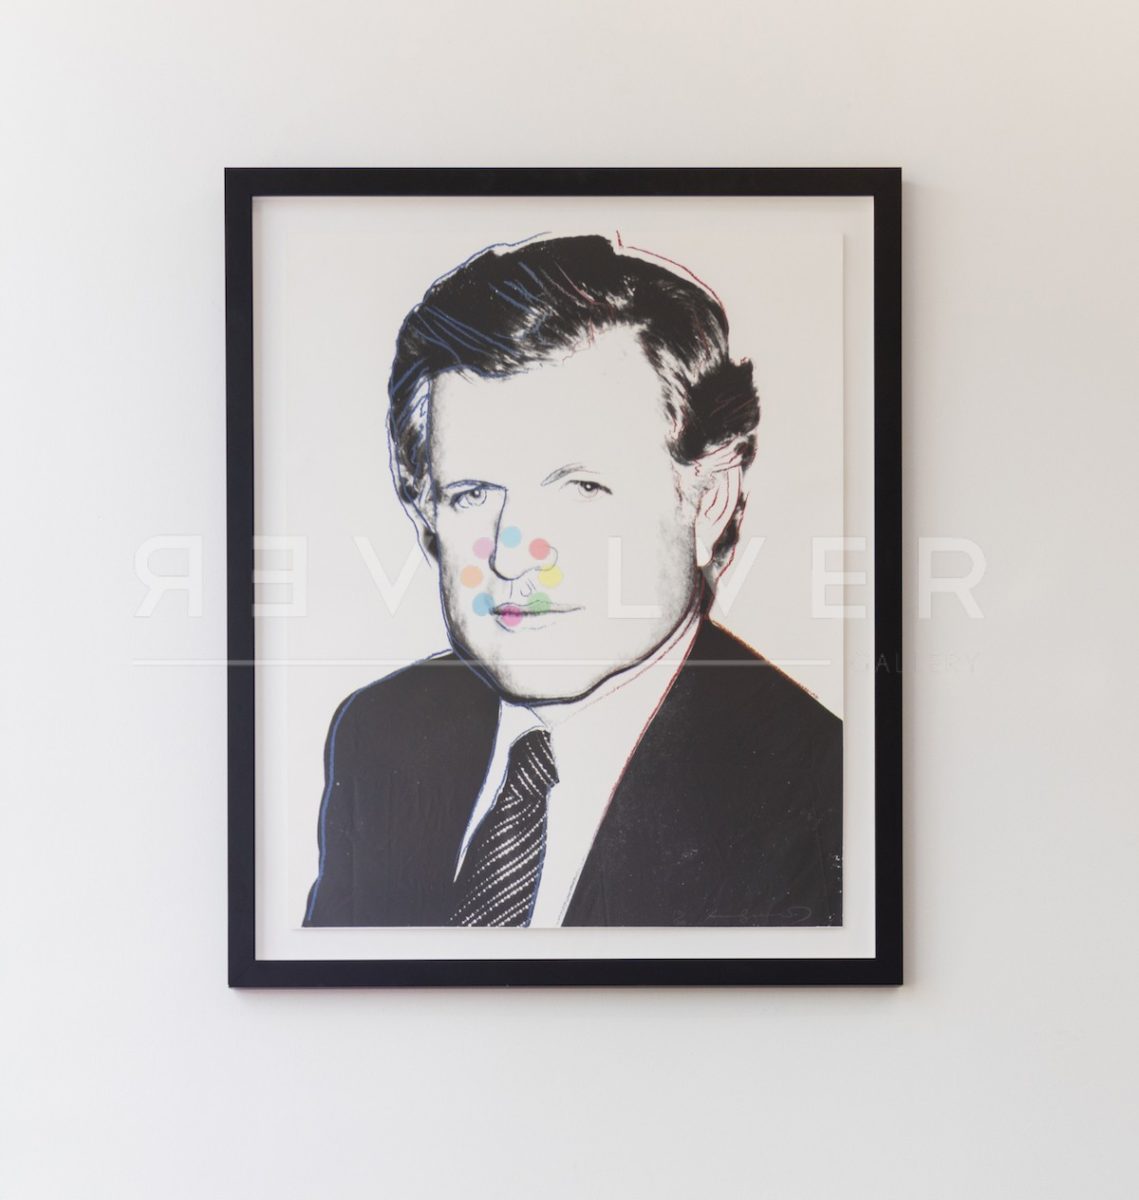 Andy Warhol Edward Kennedy 240 screenprint framed and hanging on the wall.